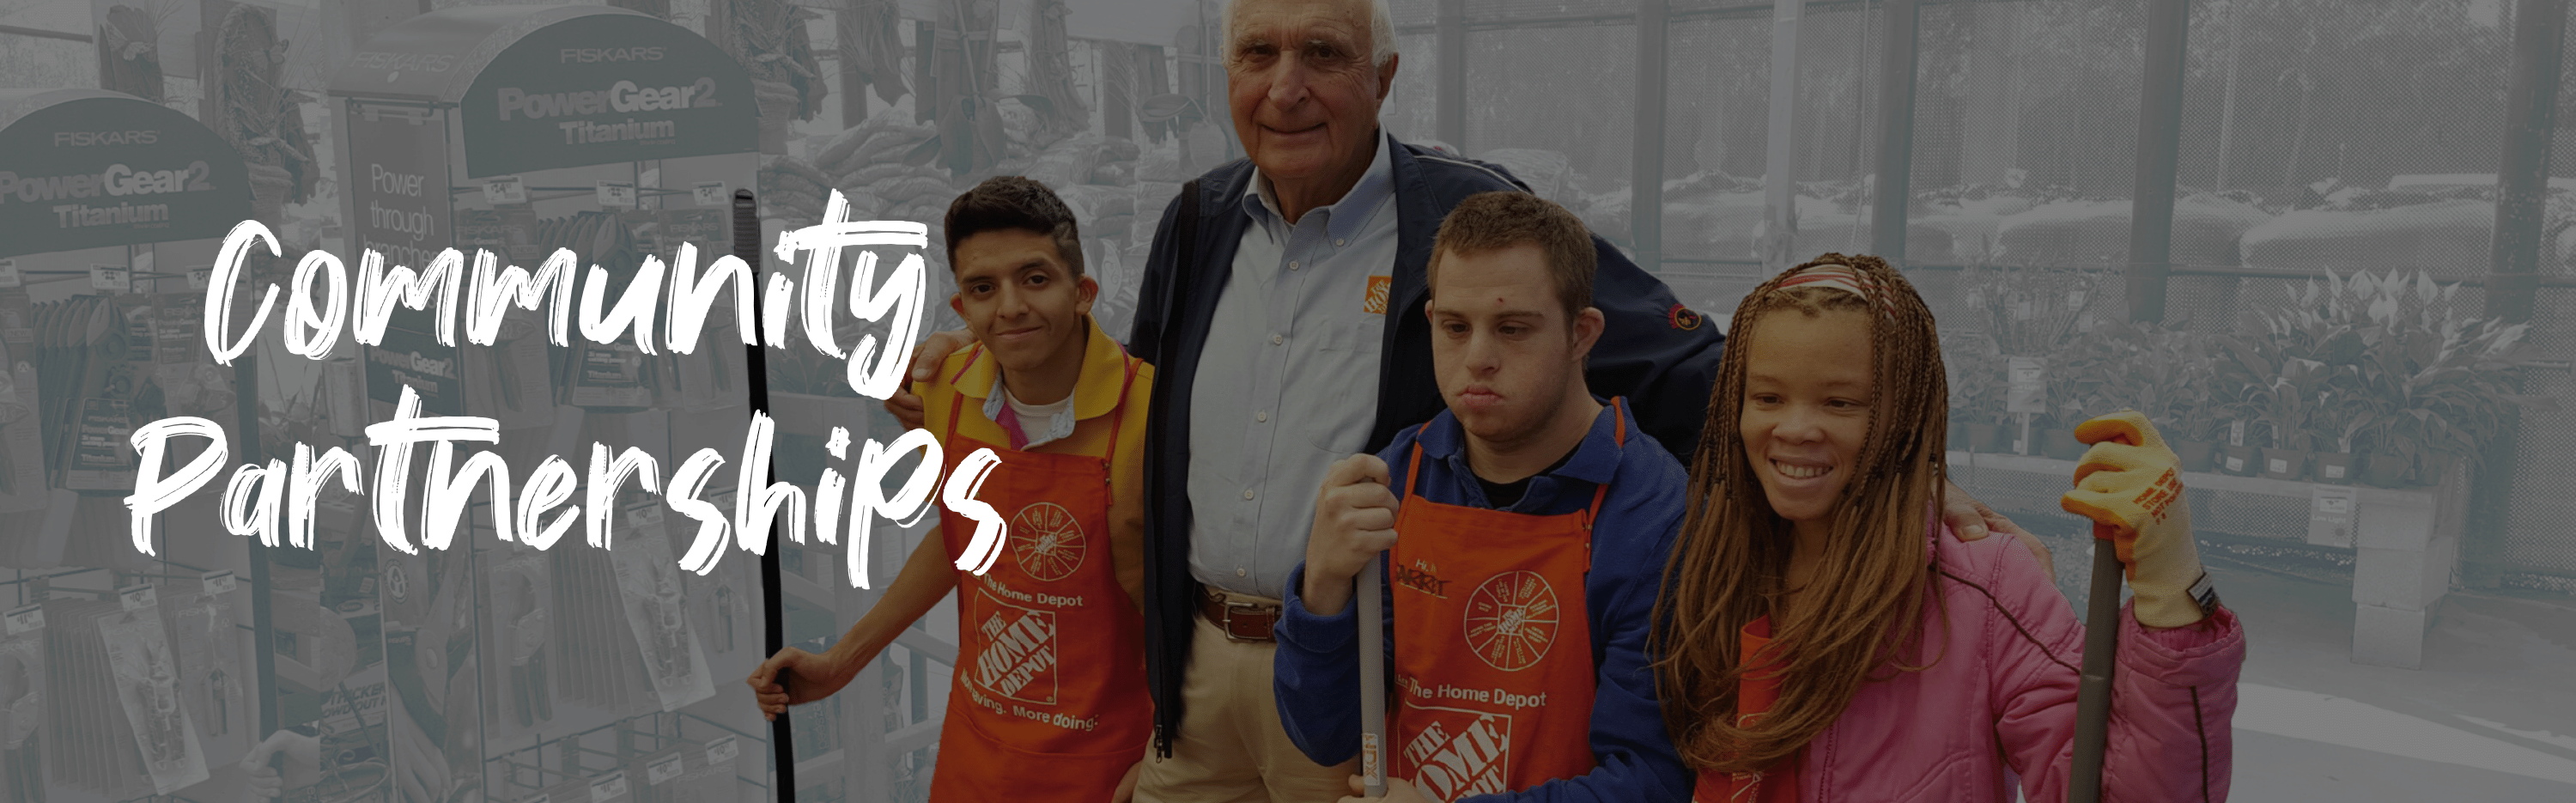 Home Depot co-founder with Ken's Krew members